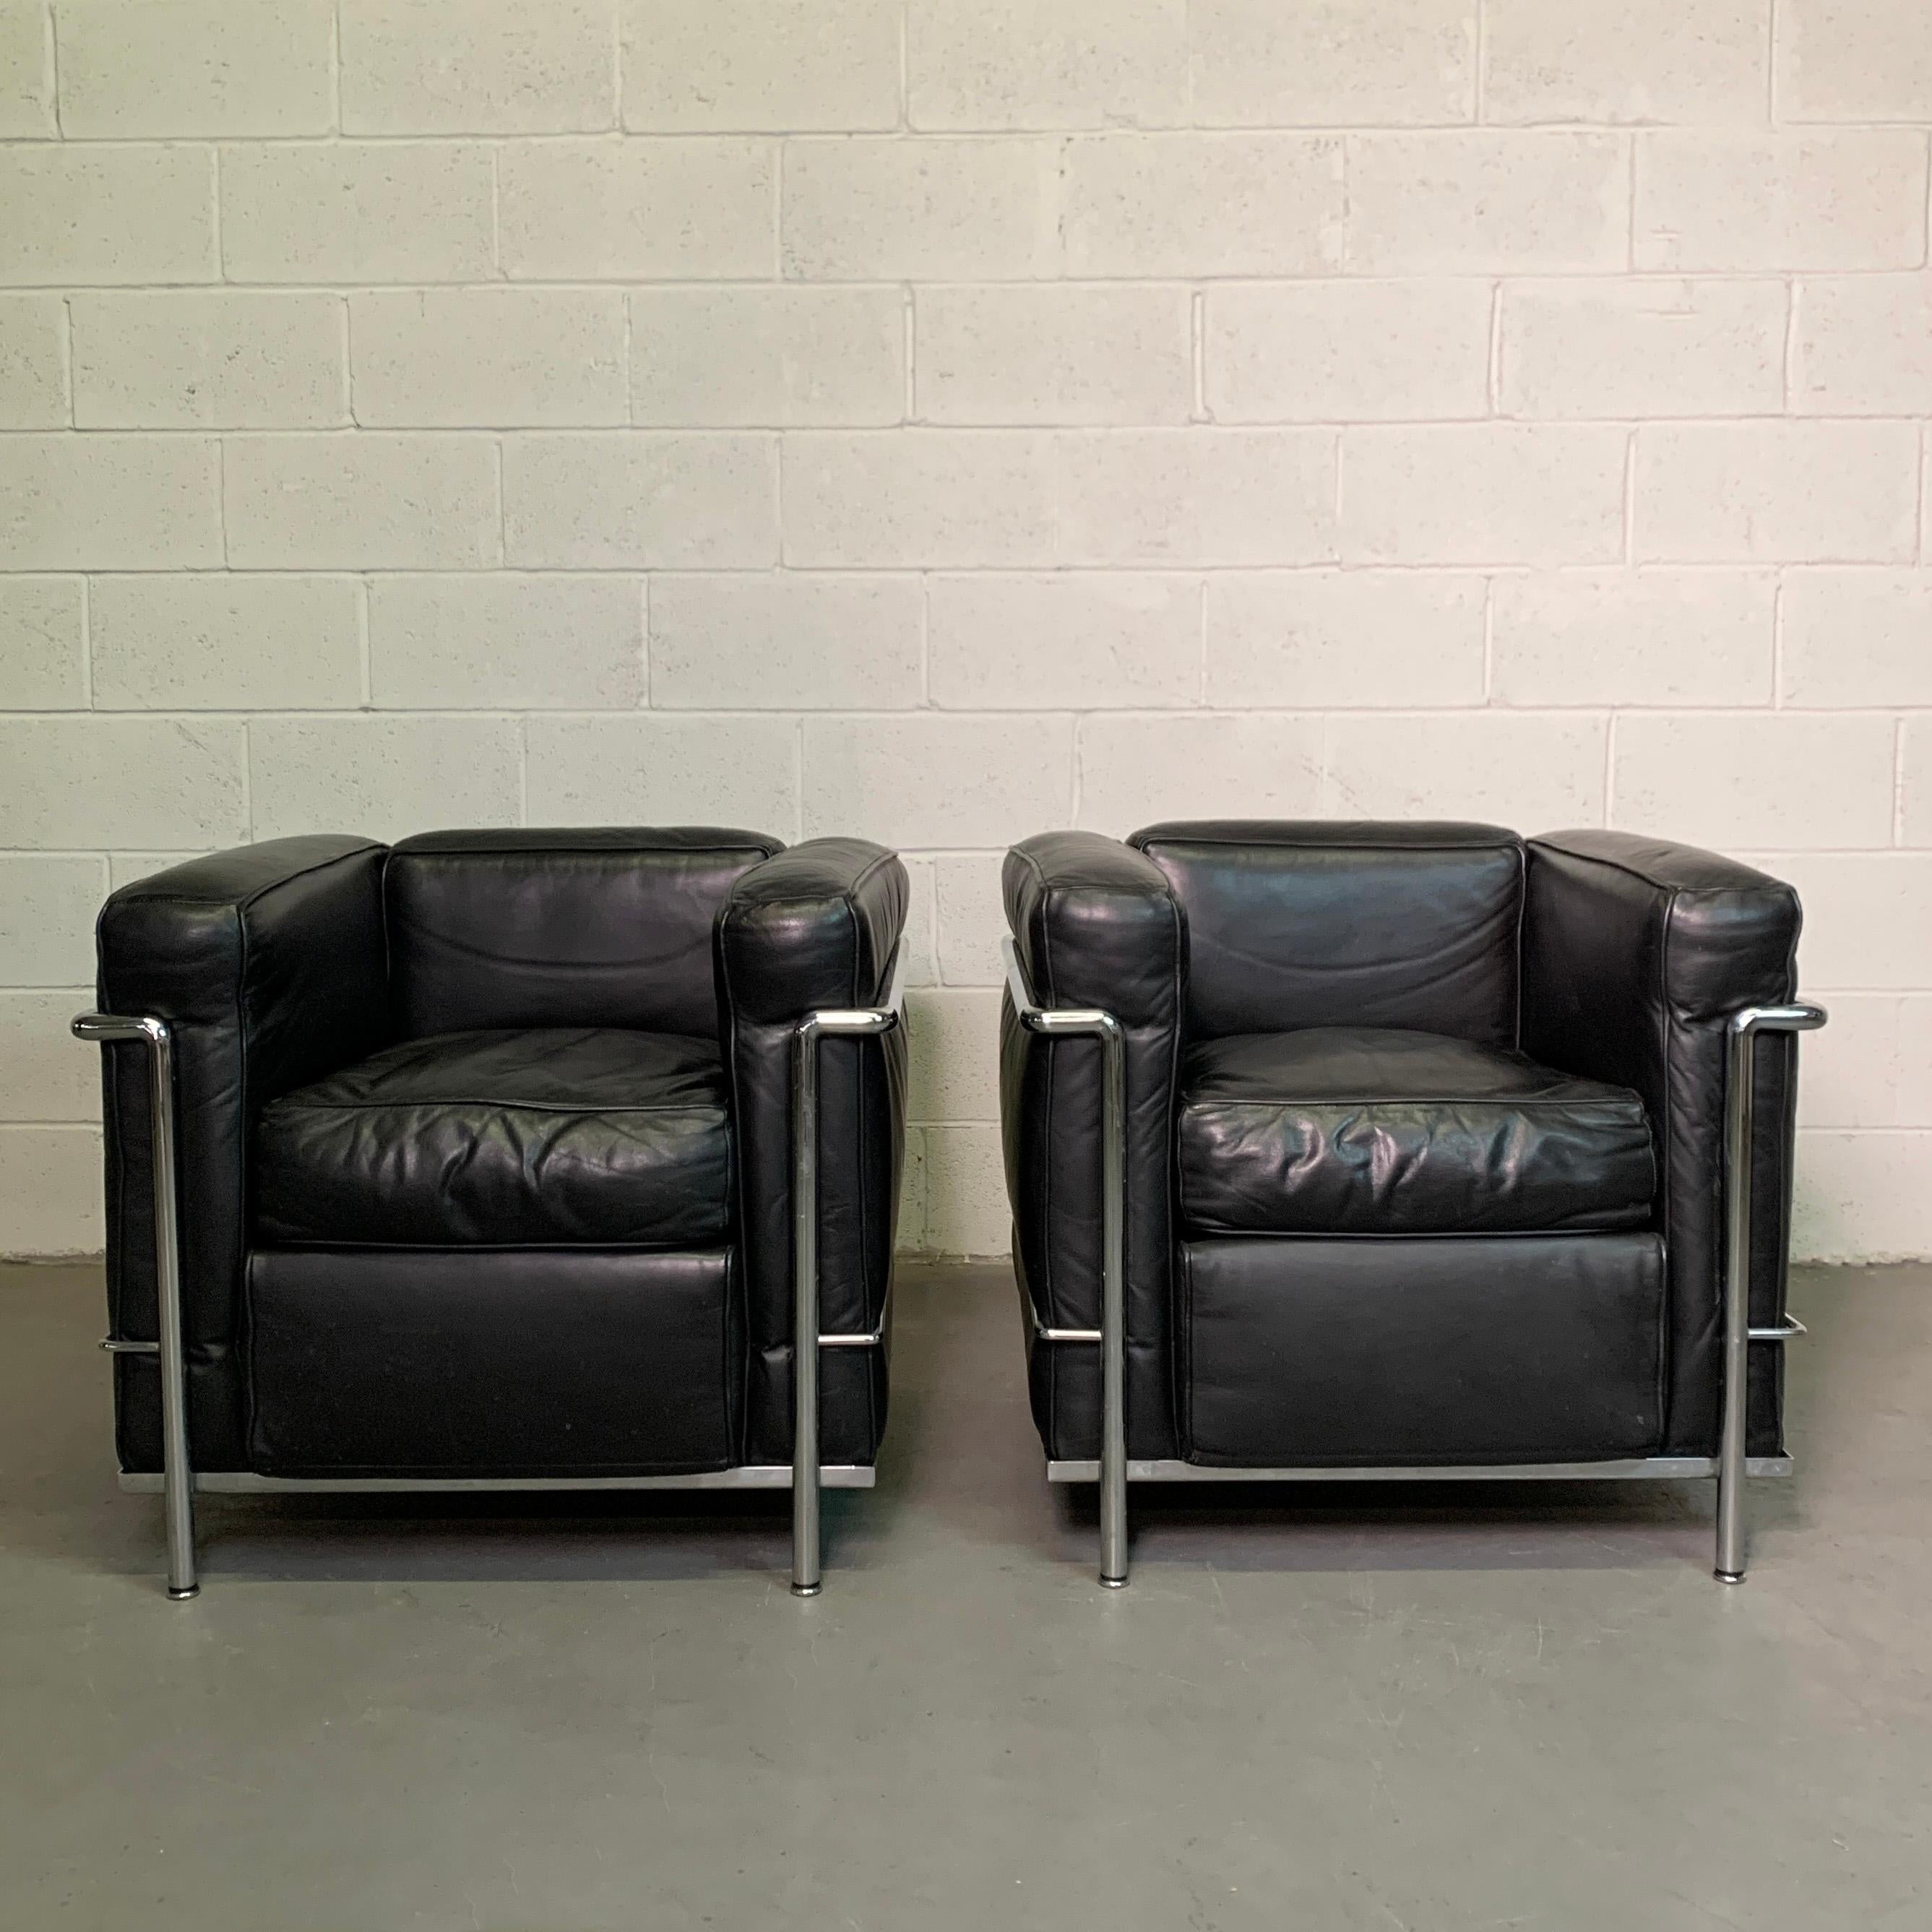 Classic, pair of LC2 club chairs designed by Le Corbusier, Charlotte Perriand and Pierre Jeanneret produced by Cassina, 1970s features black leather upholstery with a tubular chrome frame.